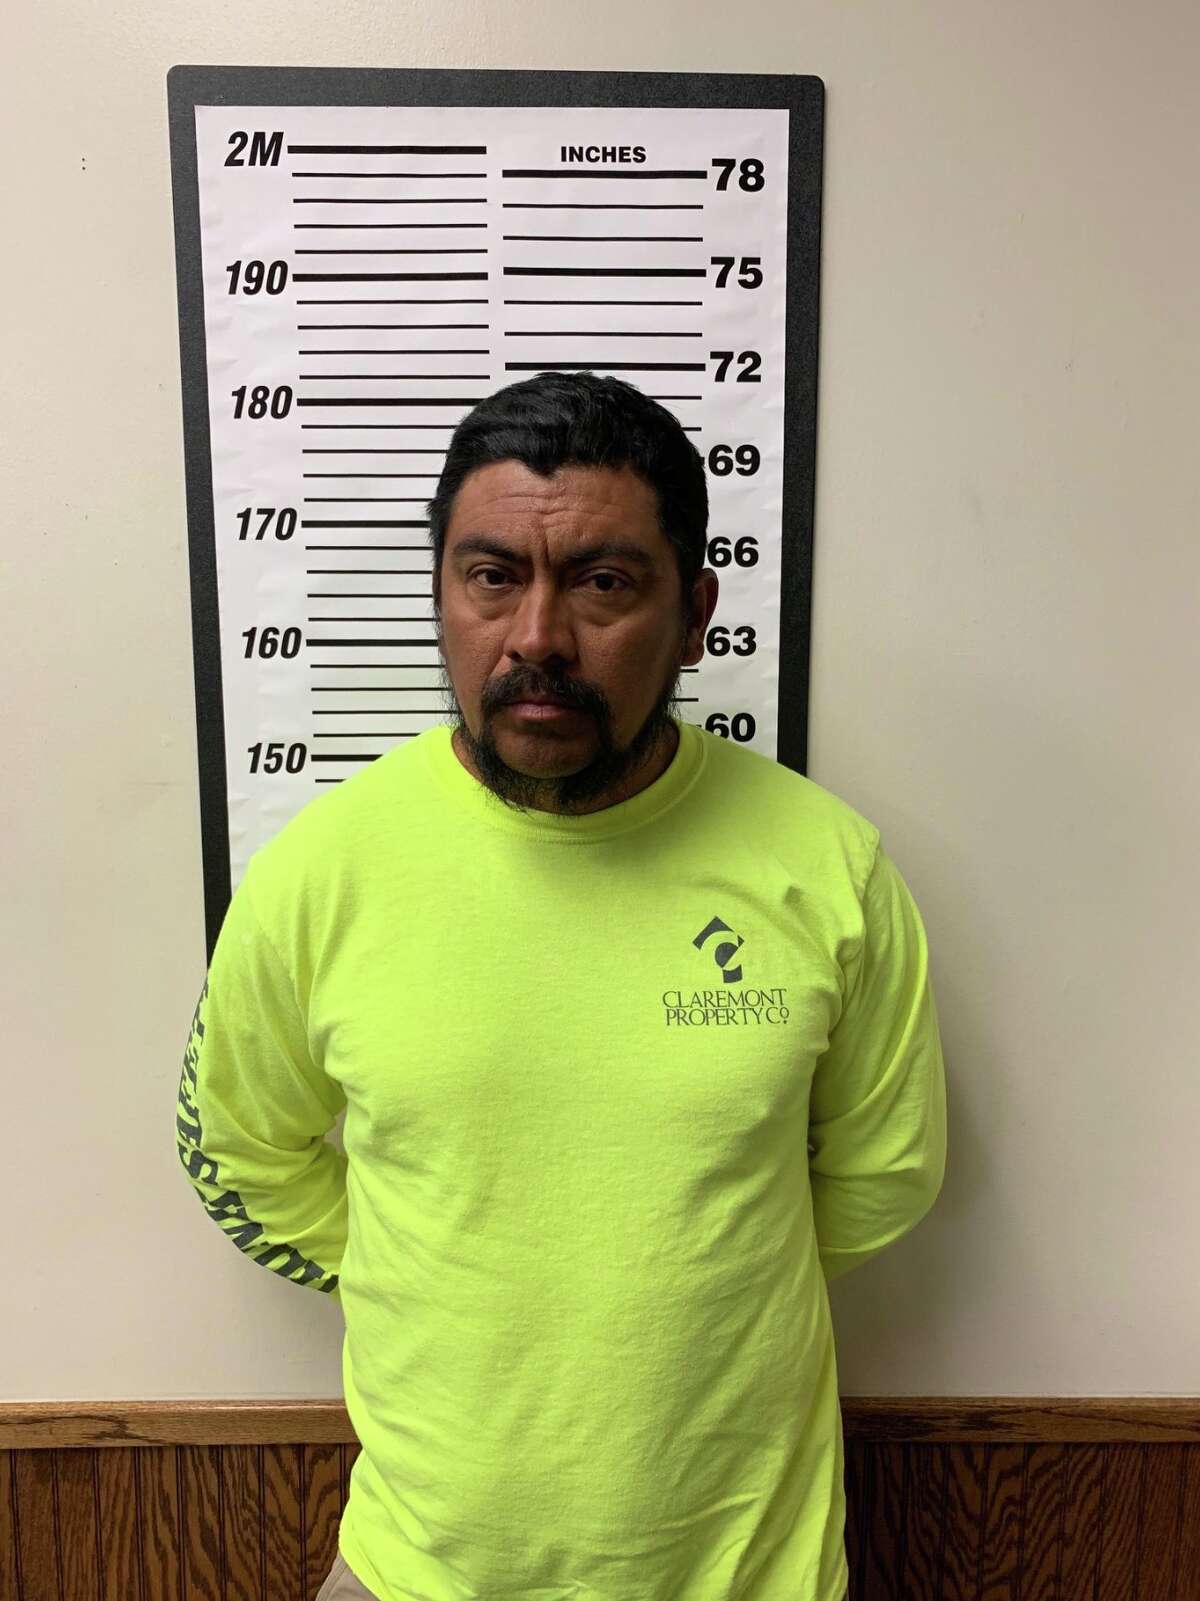 Marvin Yovani Mejia Ramos, 50, was detained and handed over to federal authorities Monday, Jan. 30, 2019, after being pulled over during a traffic stop in Montgomery County. Mejia Ramos is accused of being in the country illegally and has an extensive criminal history, including several child sex crimes.